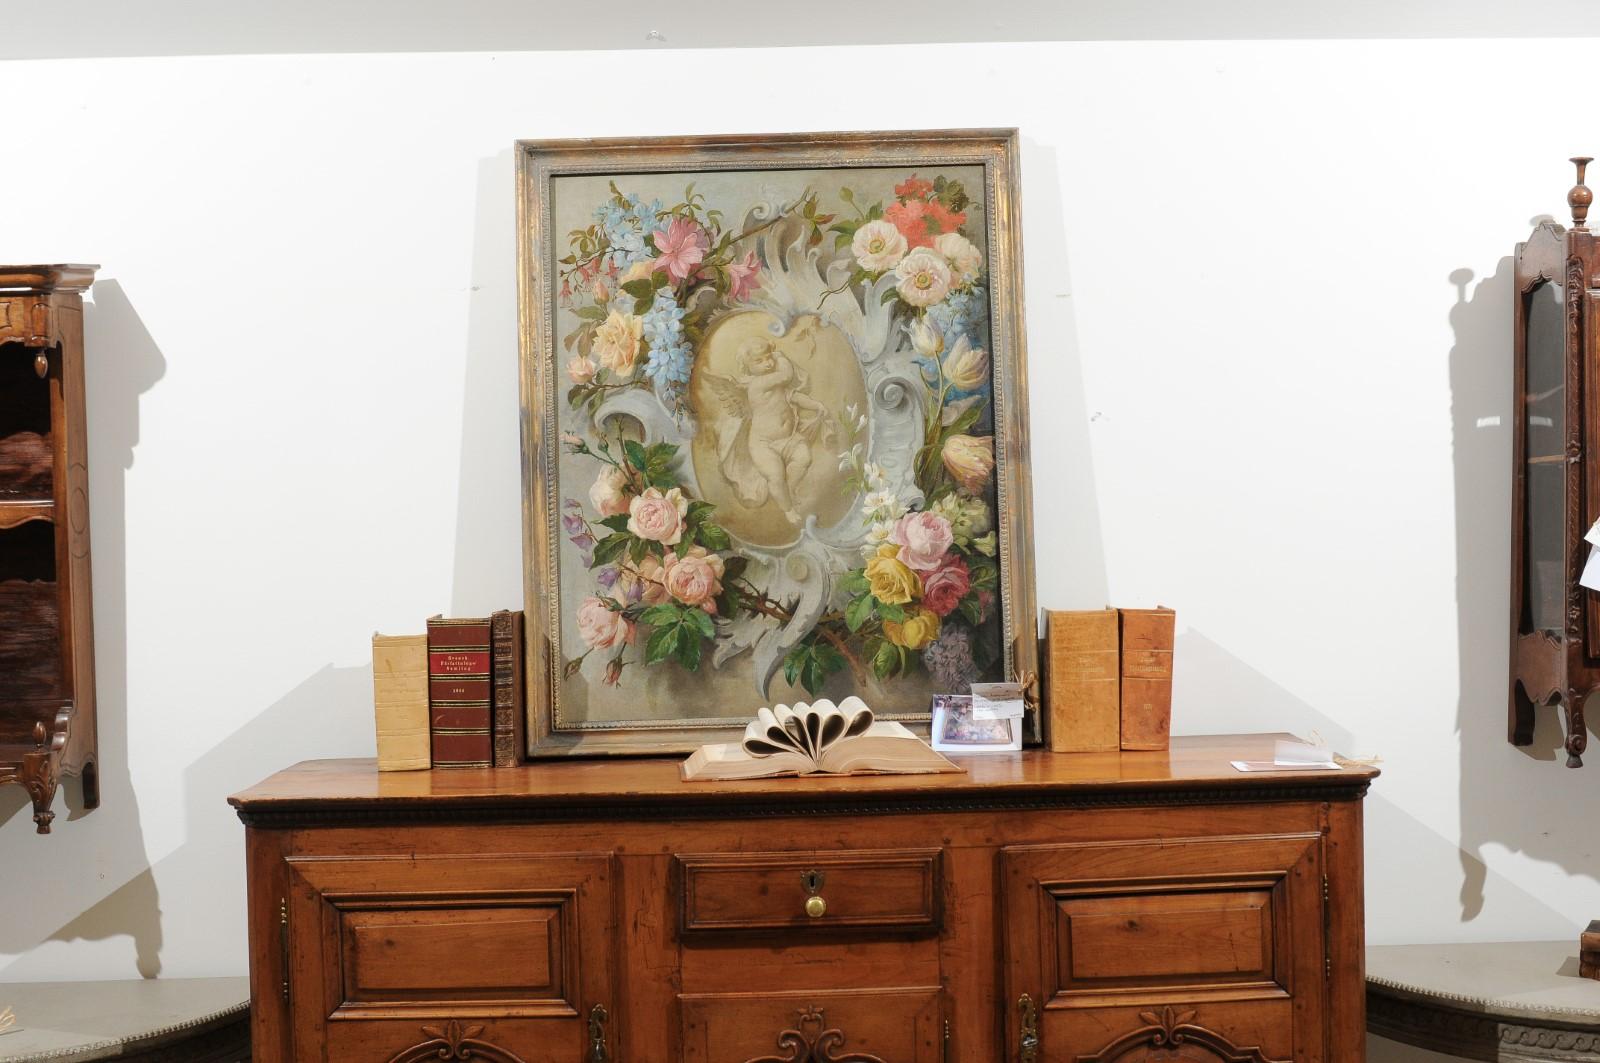 A French Aubusson cartoon painting from the 19th century, with floral decor surrounding a cherub populated cartouche. Created to be used as a model to weave a tapestry in the Aubusson manufacture located in central France, this framed oil painting